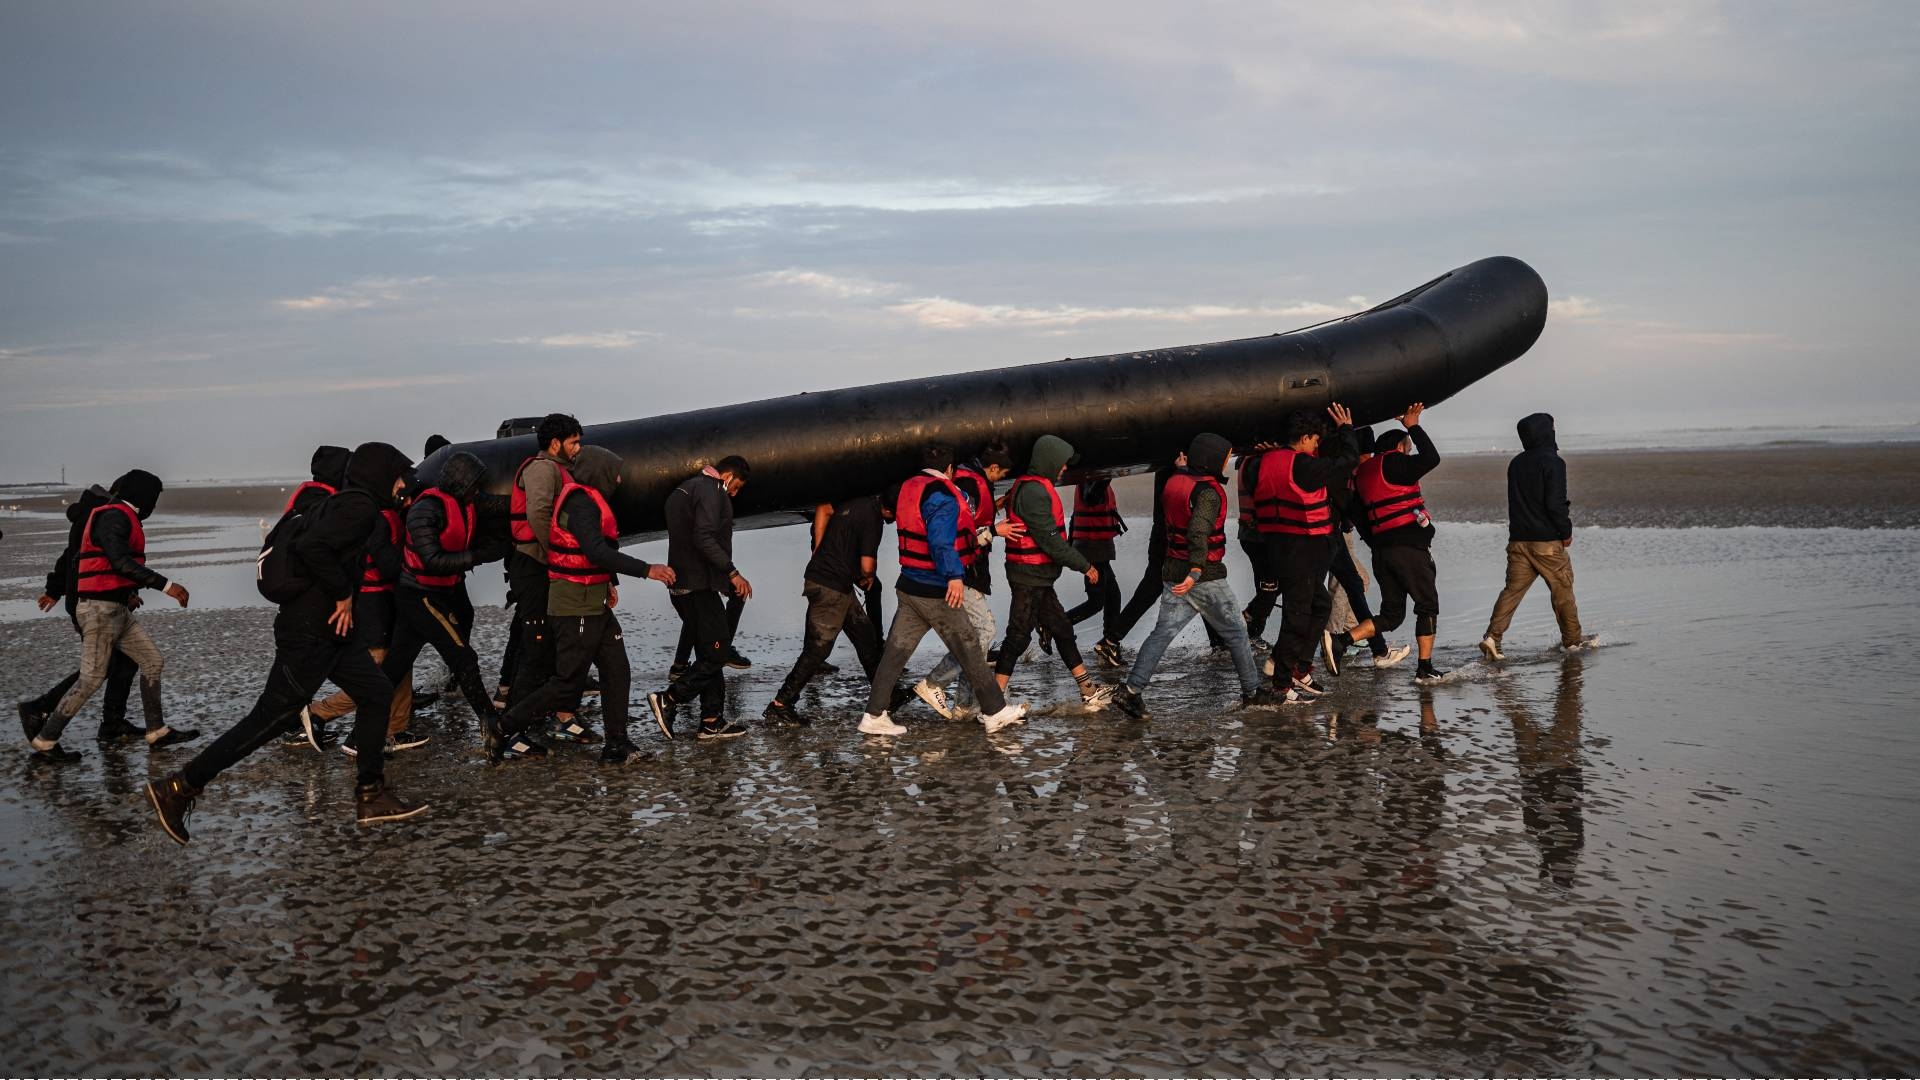 People carry a boat on their shoulders as they prepare to embark on the beach of Gravelines, near Dunkirk, northern France on 12 October 2022 in an attempt to cross the English Channel (AFP)